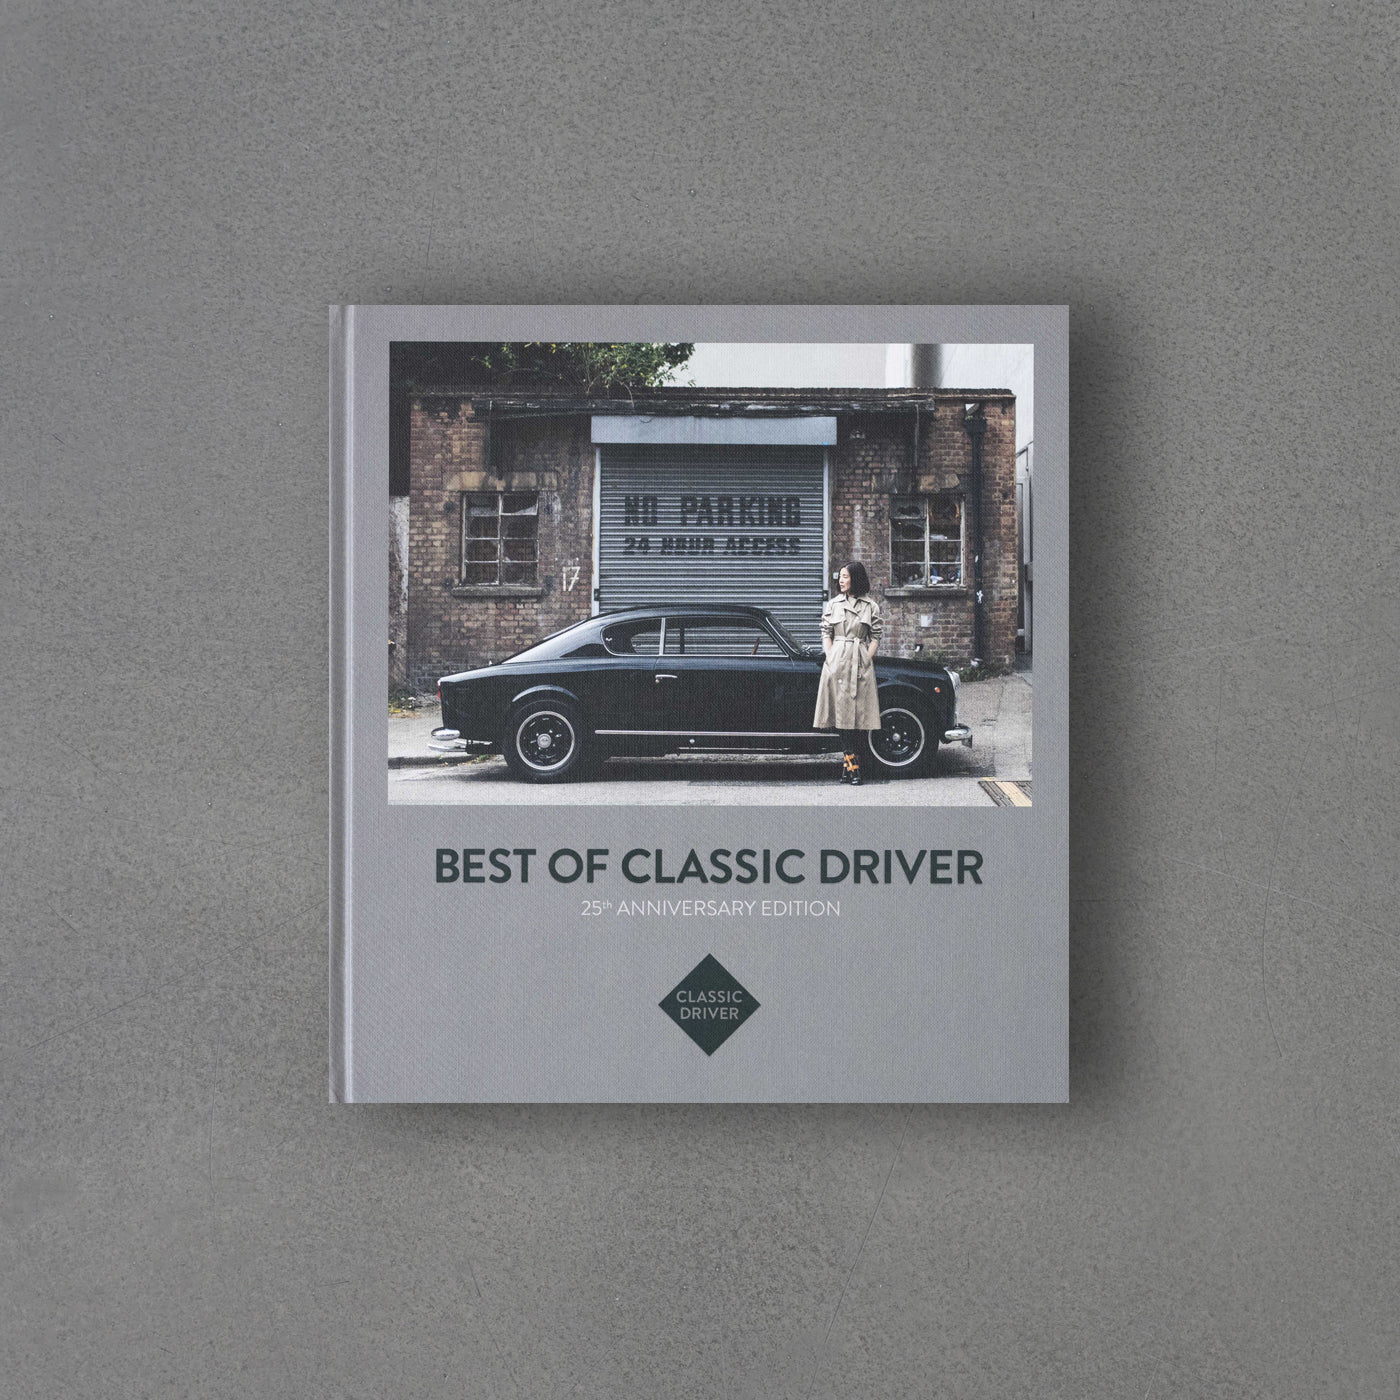 Best of Classic Driver - 25th Anniversary Edition